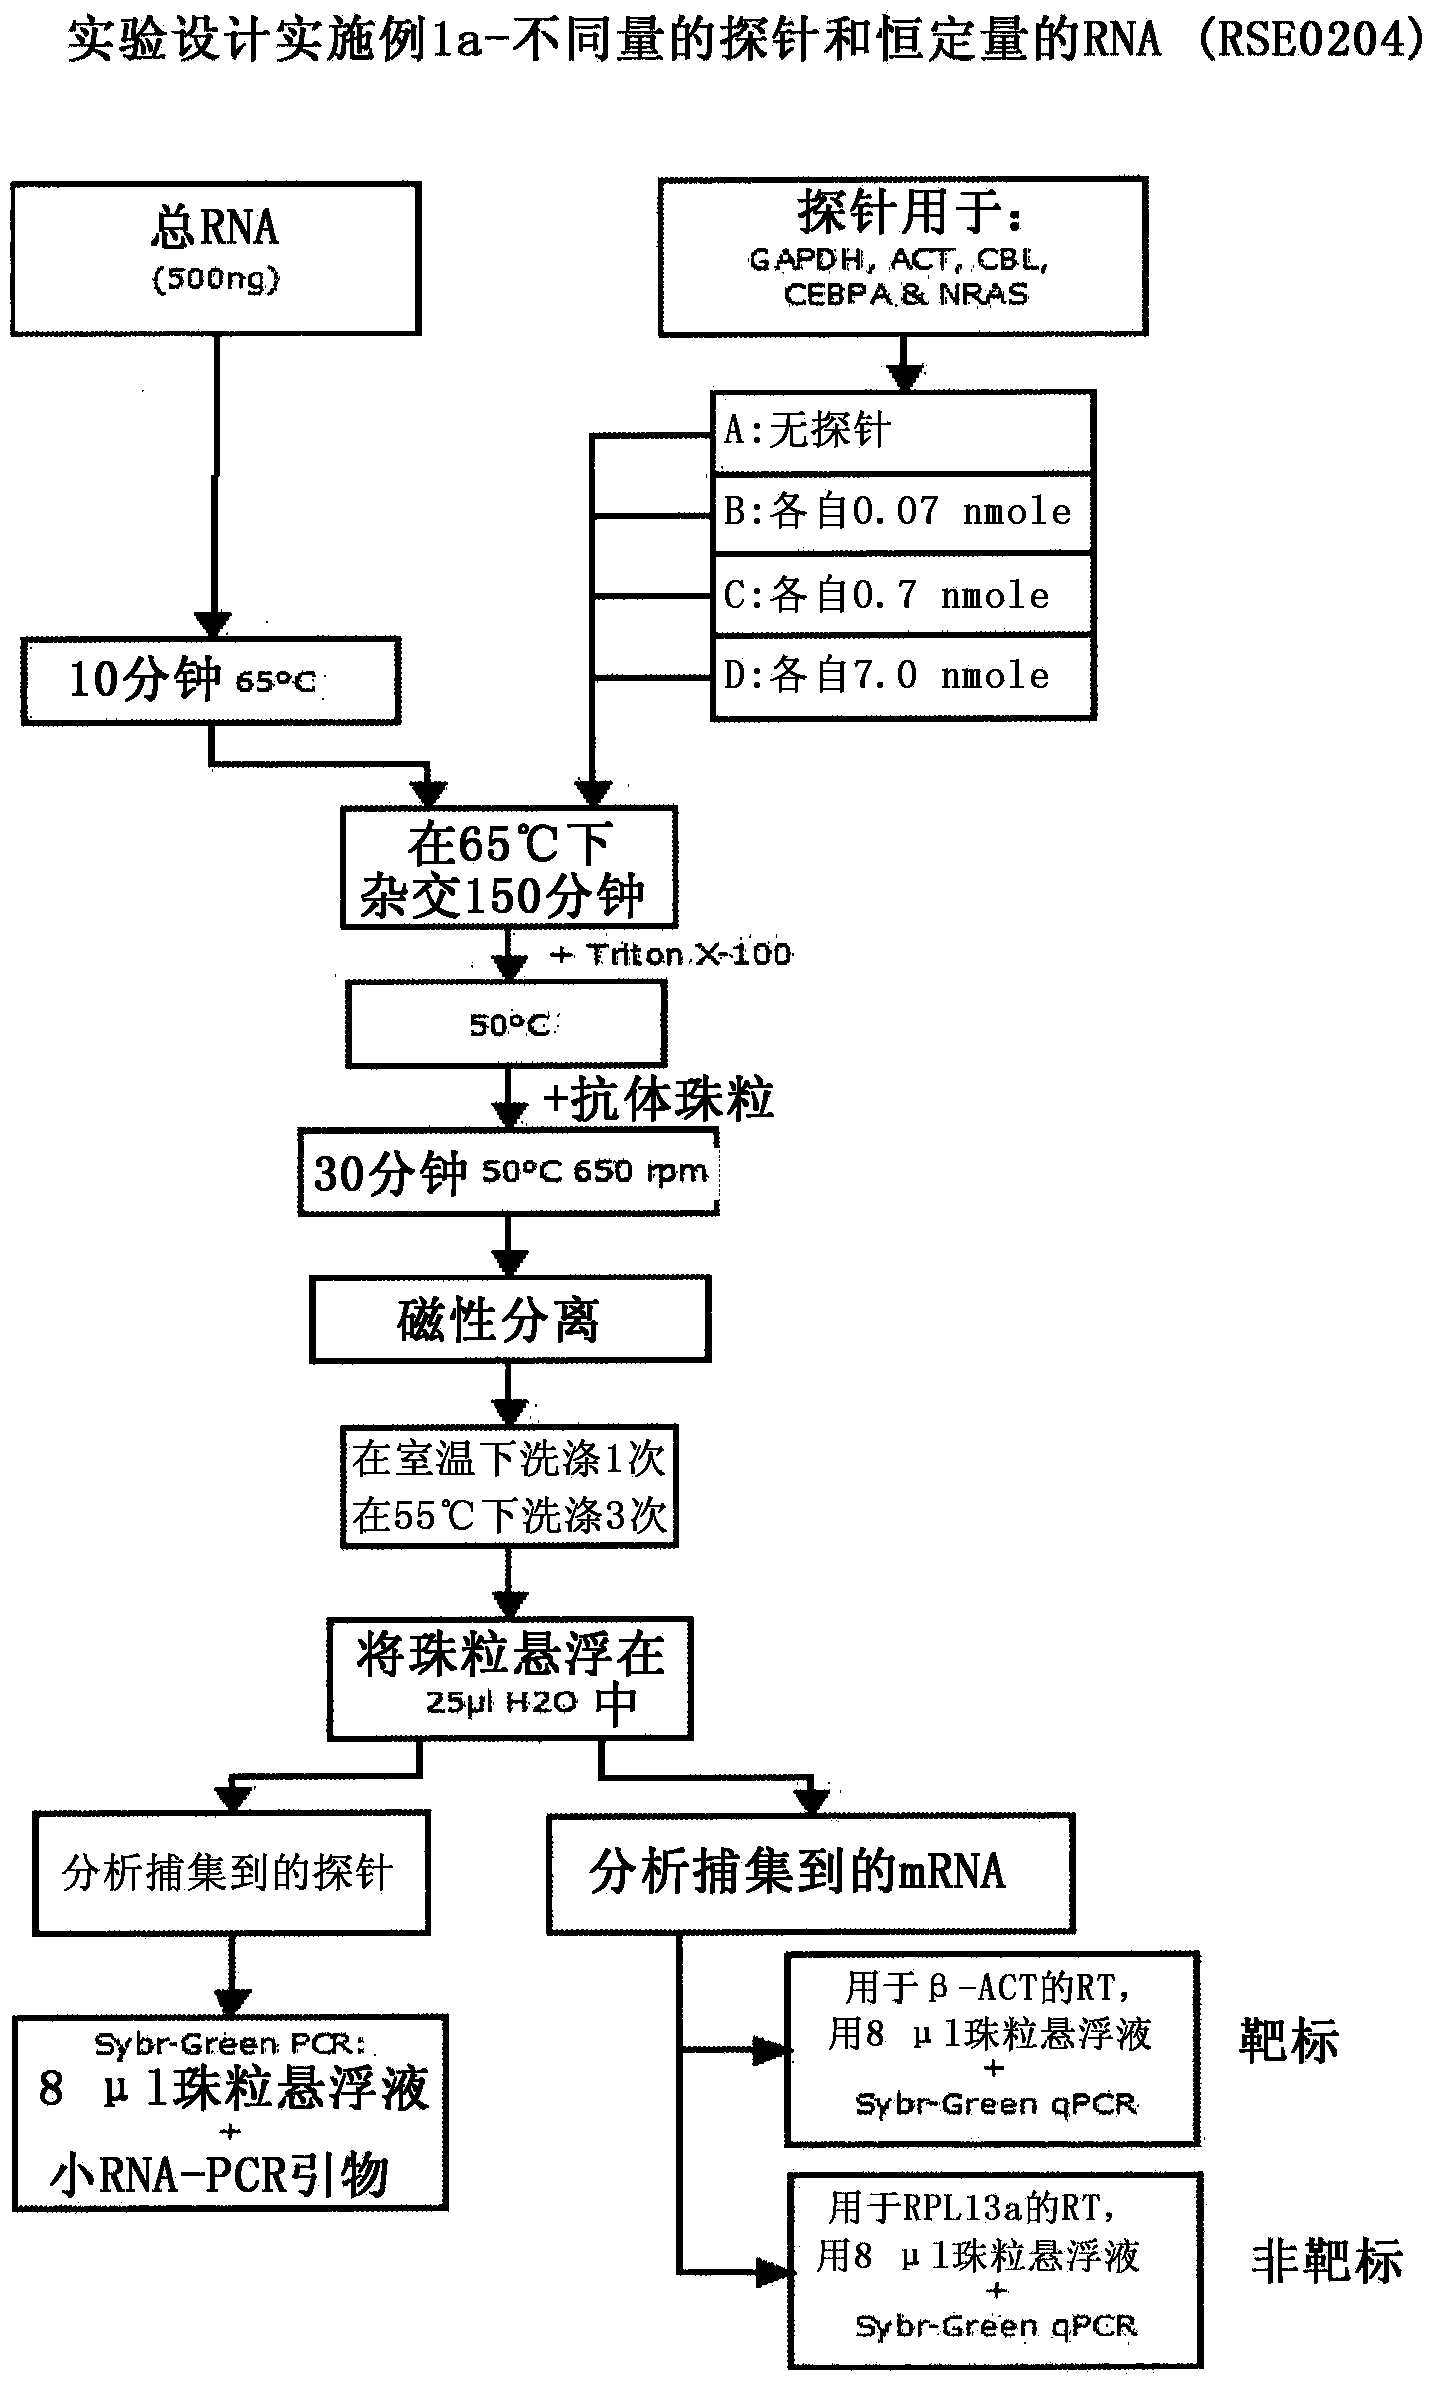 Method and kit for characterizing rna in a composition